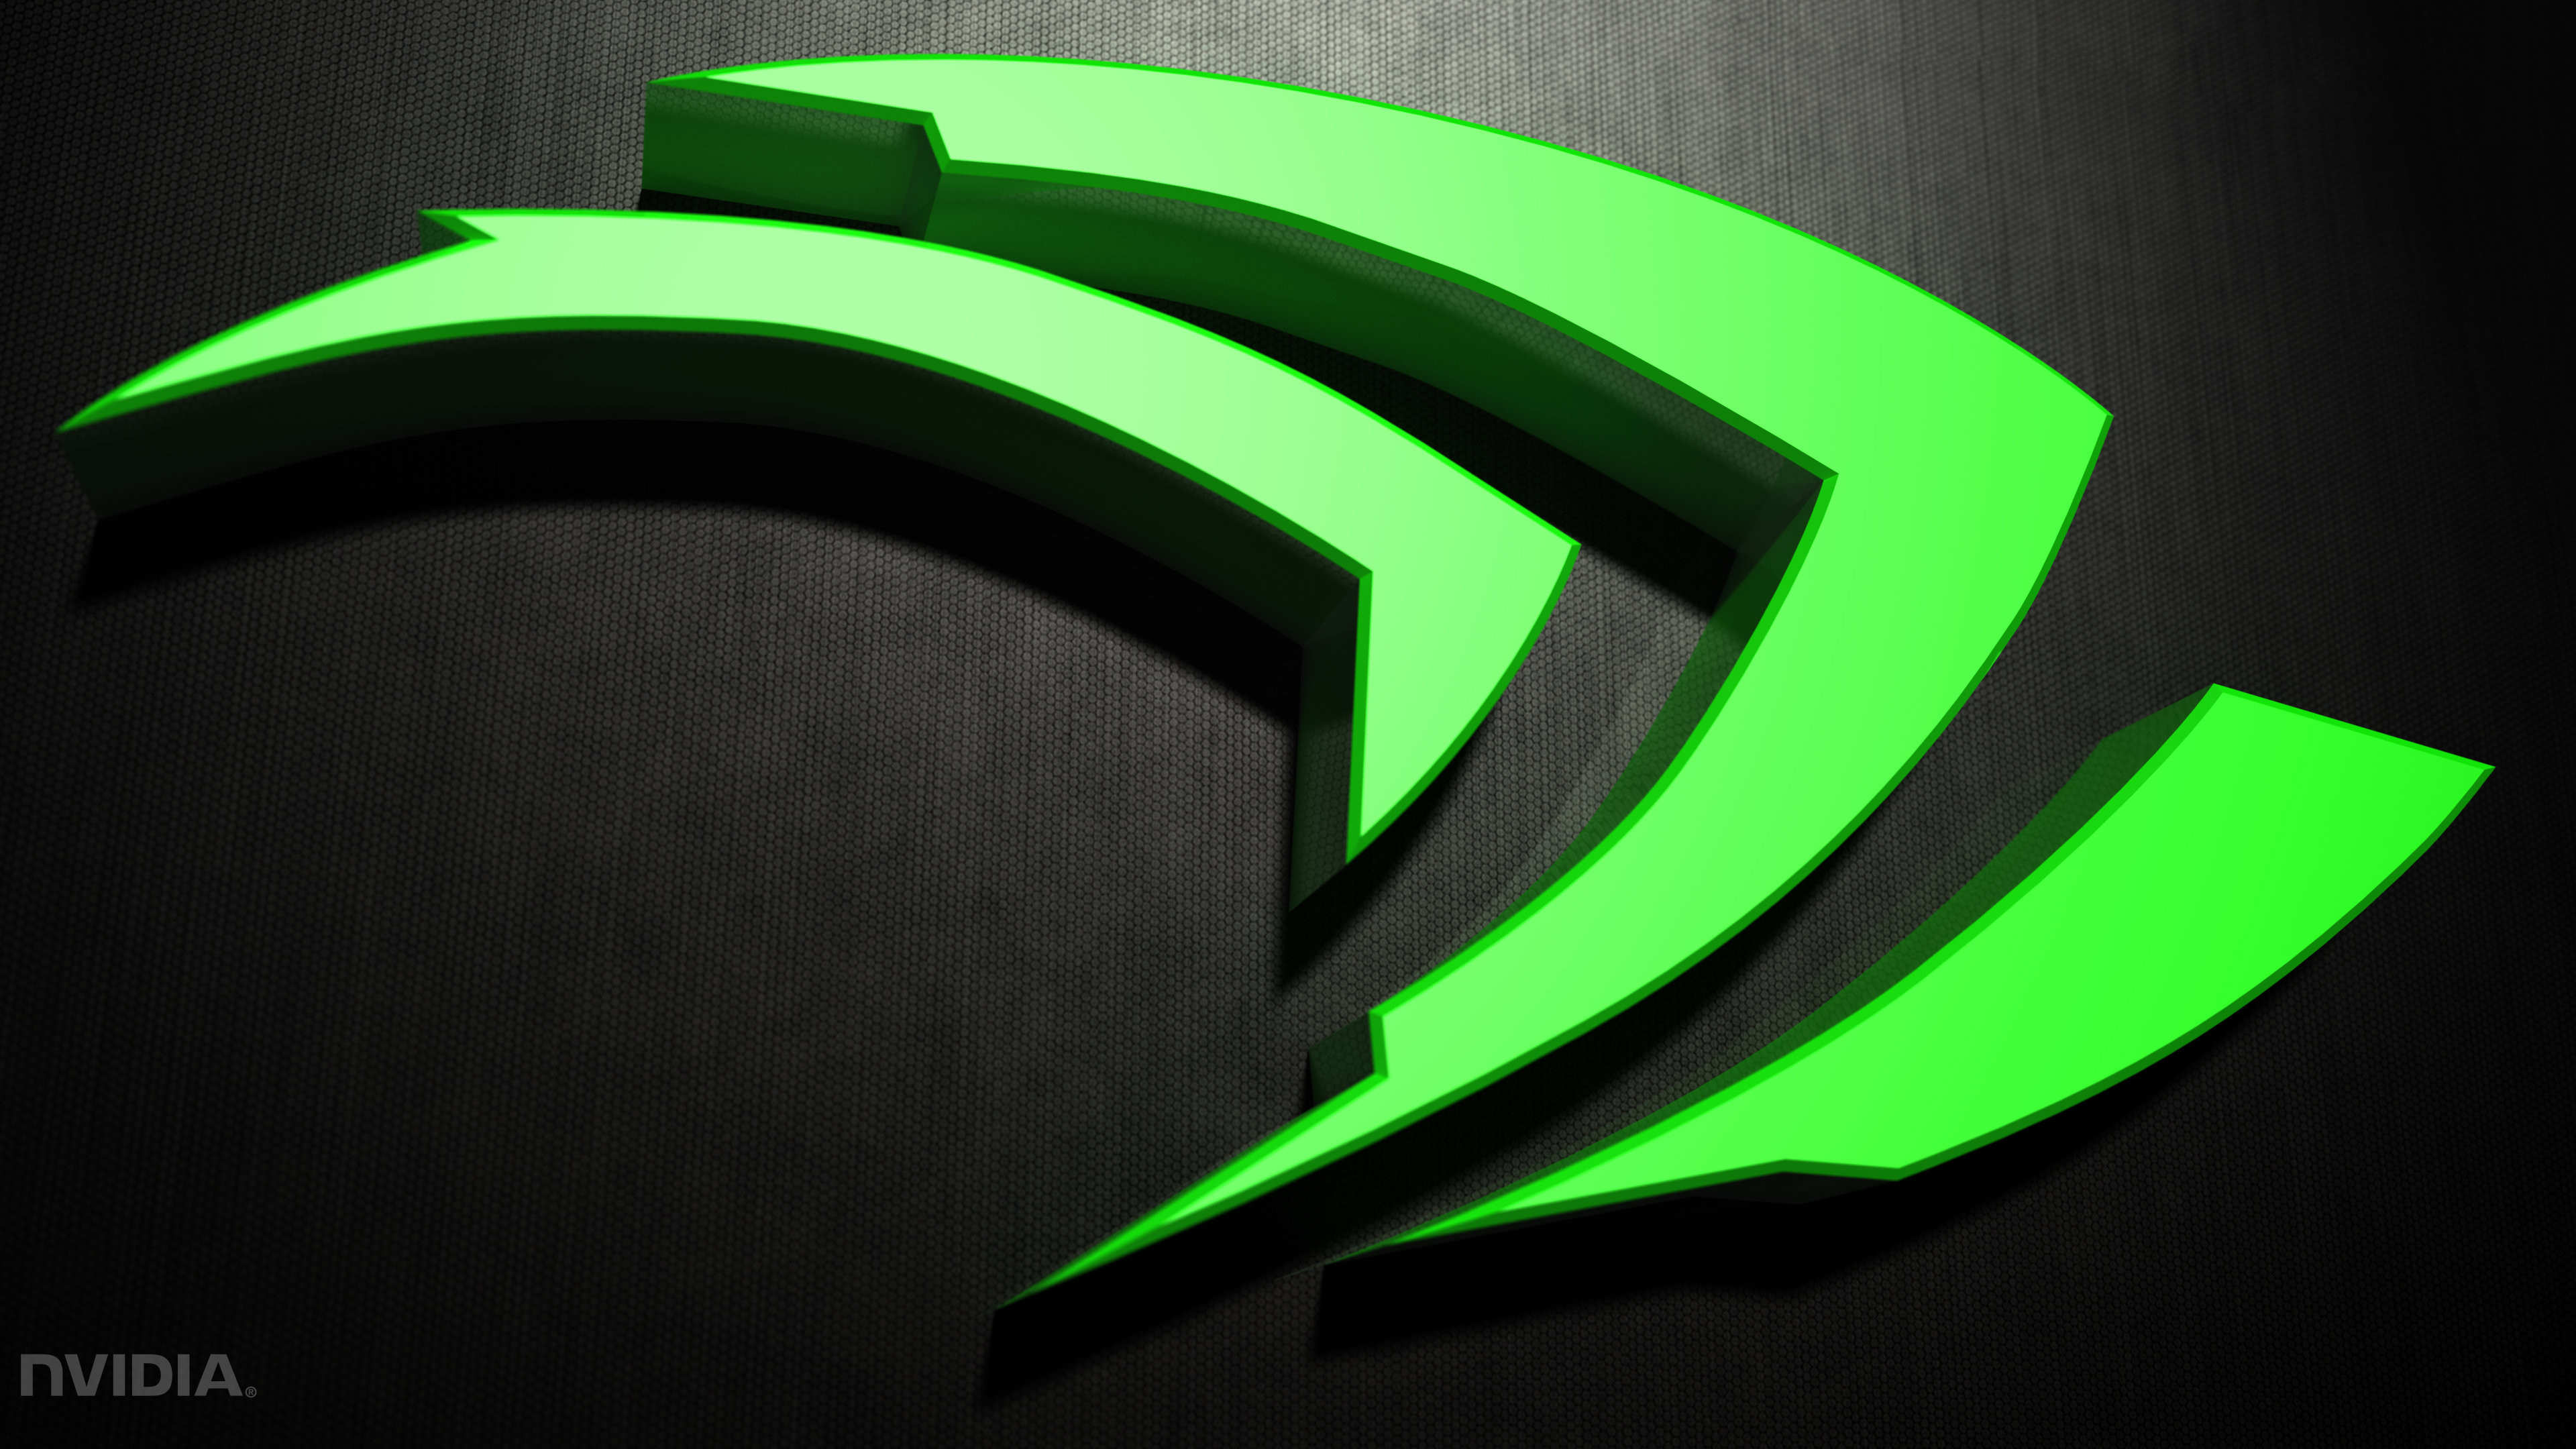 68+ 4k nvidia wallpapers on wallpaperplay